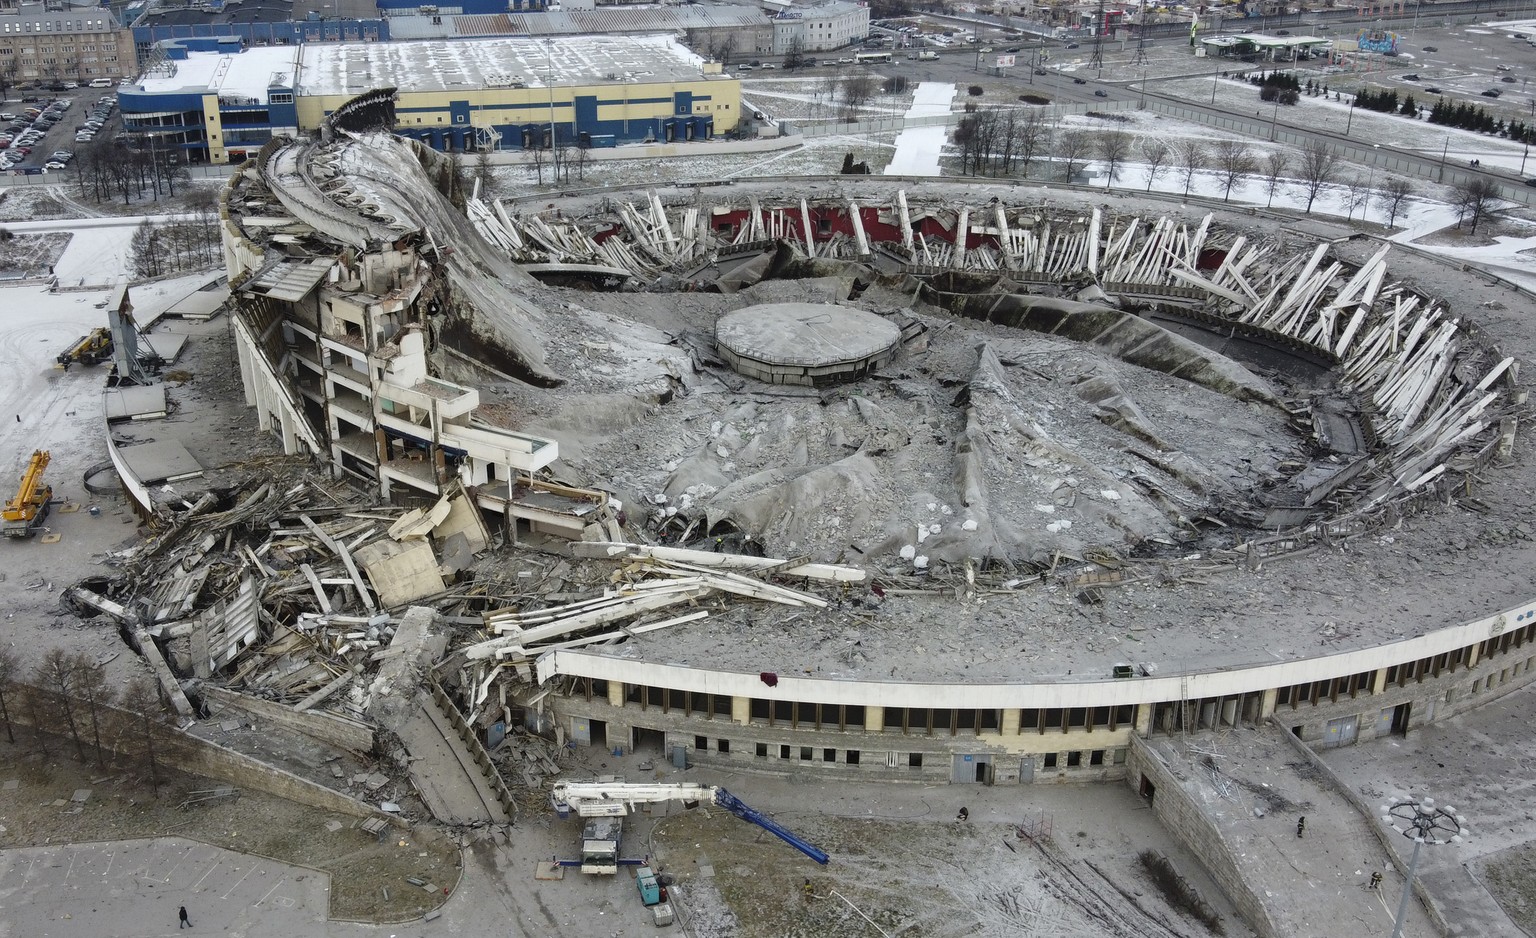 A view of stadium, sports and concert complex Petersburgsky, collapsed during disassembly of the roof in St.Petersburg, Russia, Friday, Jan. 31, 2020. The Peterburgsky stadium, one of the biggest stad ...